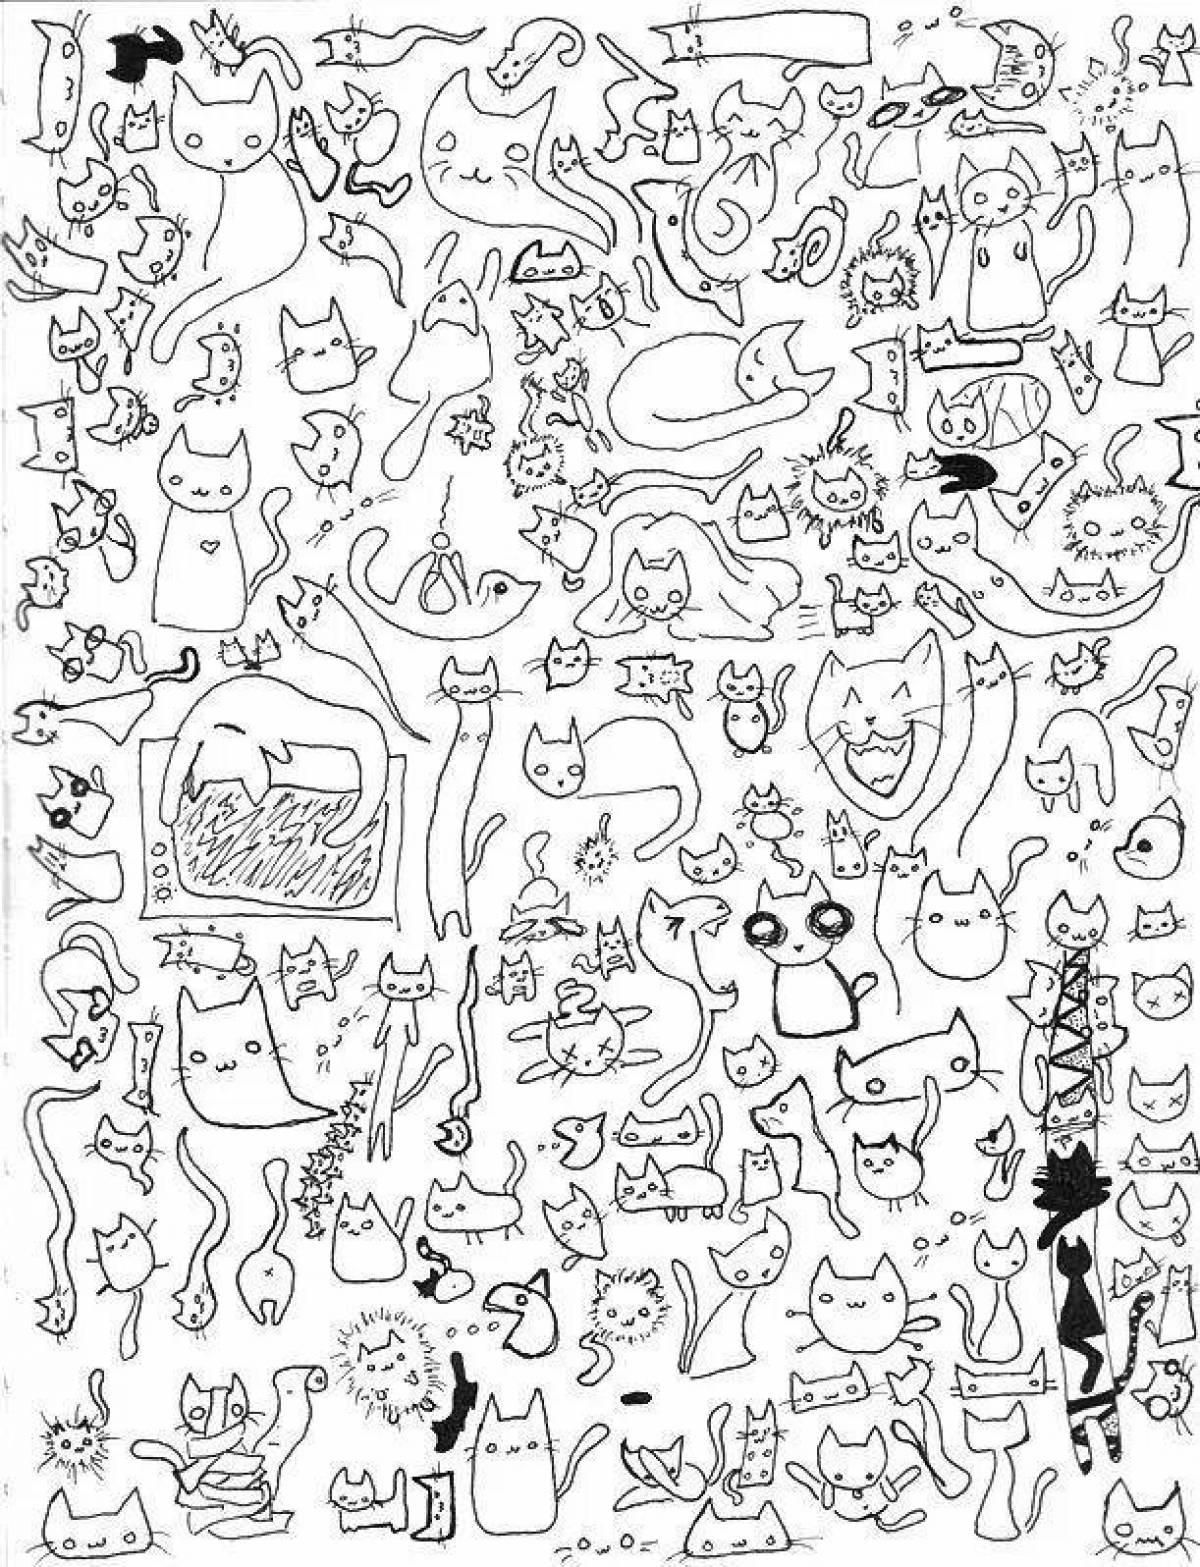 Lovely coloring book with lots of cats